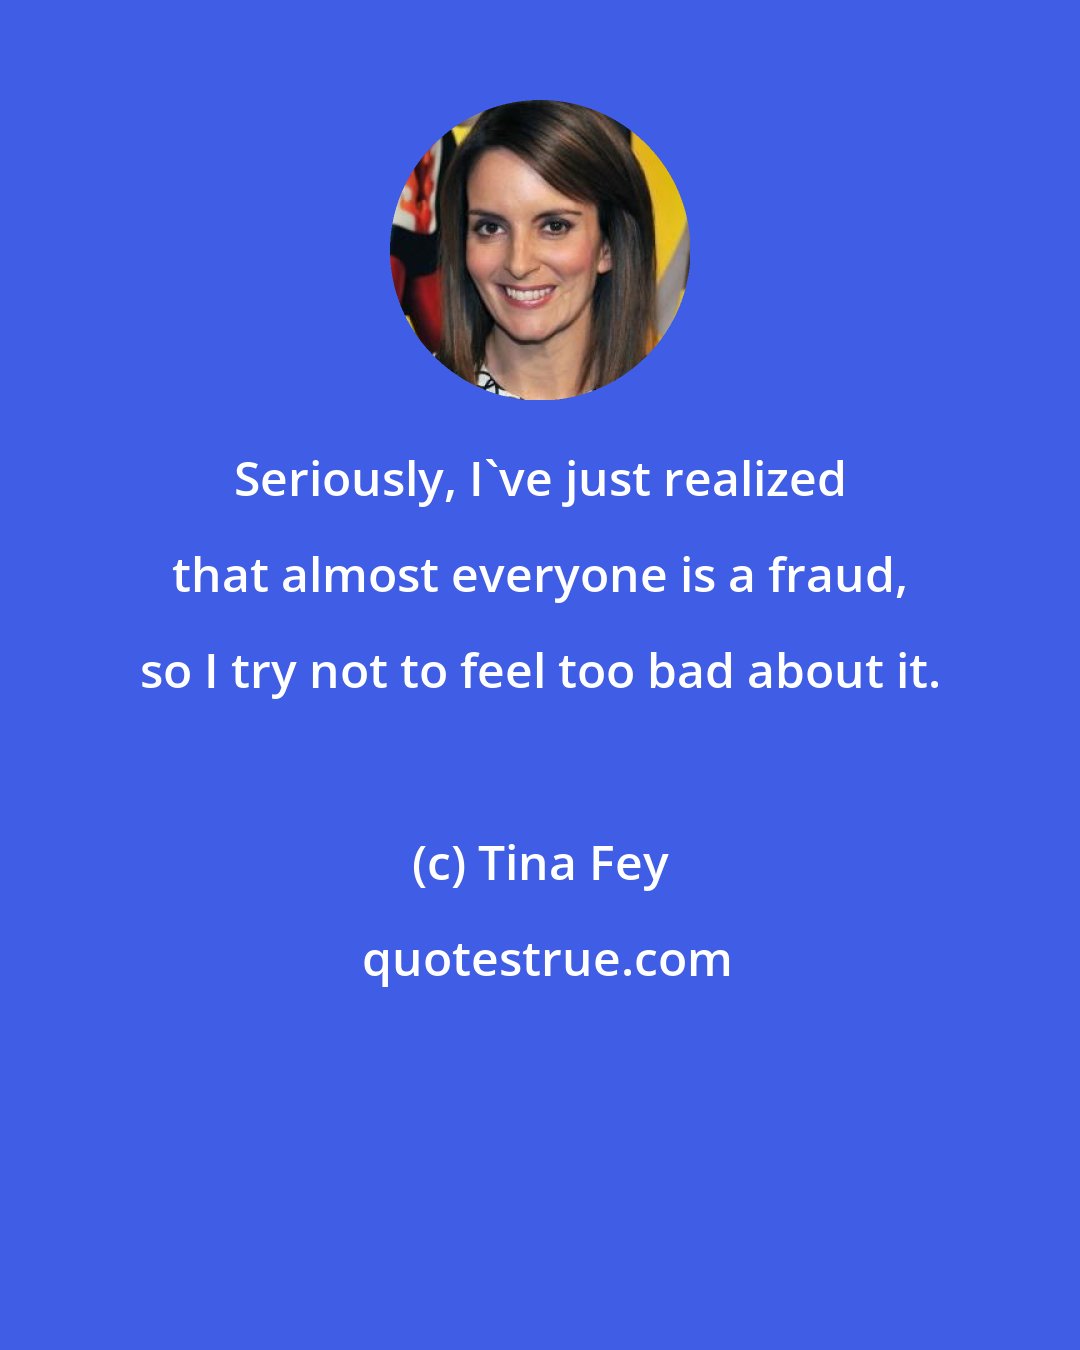 Tina Fey: Seriously, I've just realized that almost everyone is a fraud, so I try not to feel too bad about it.